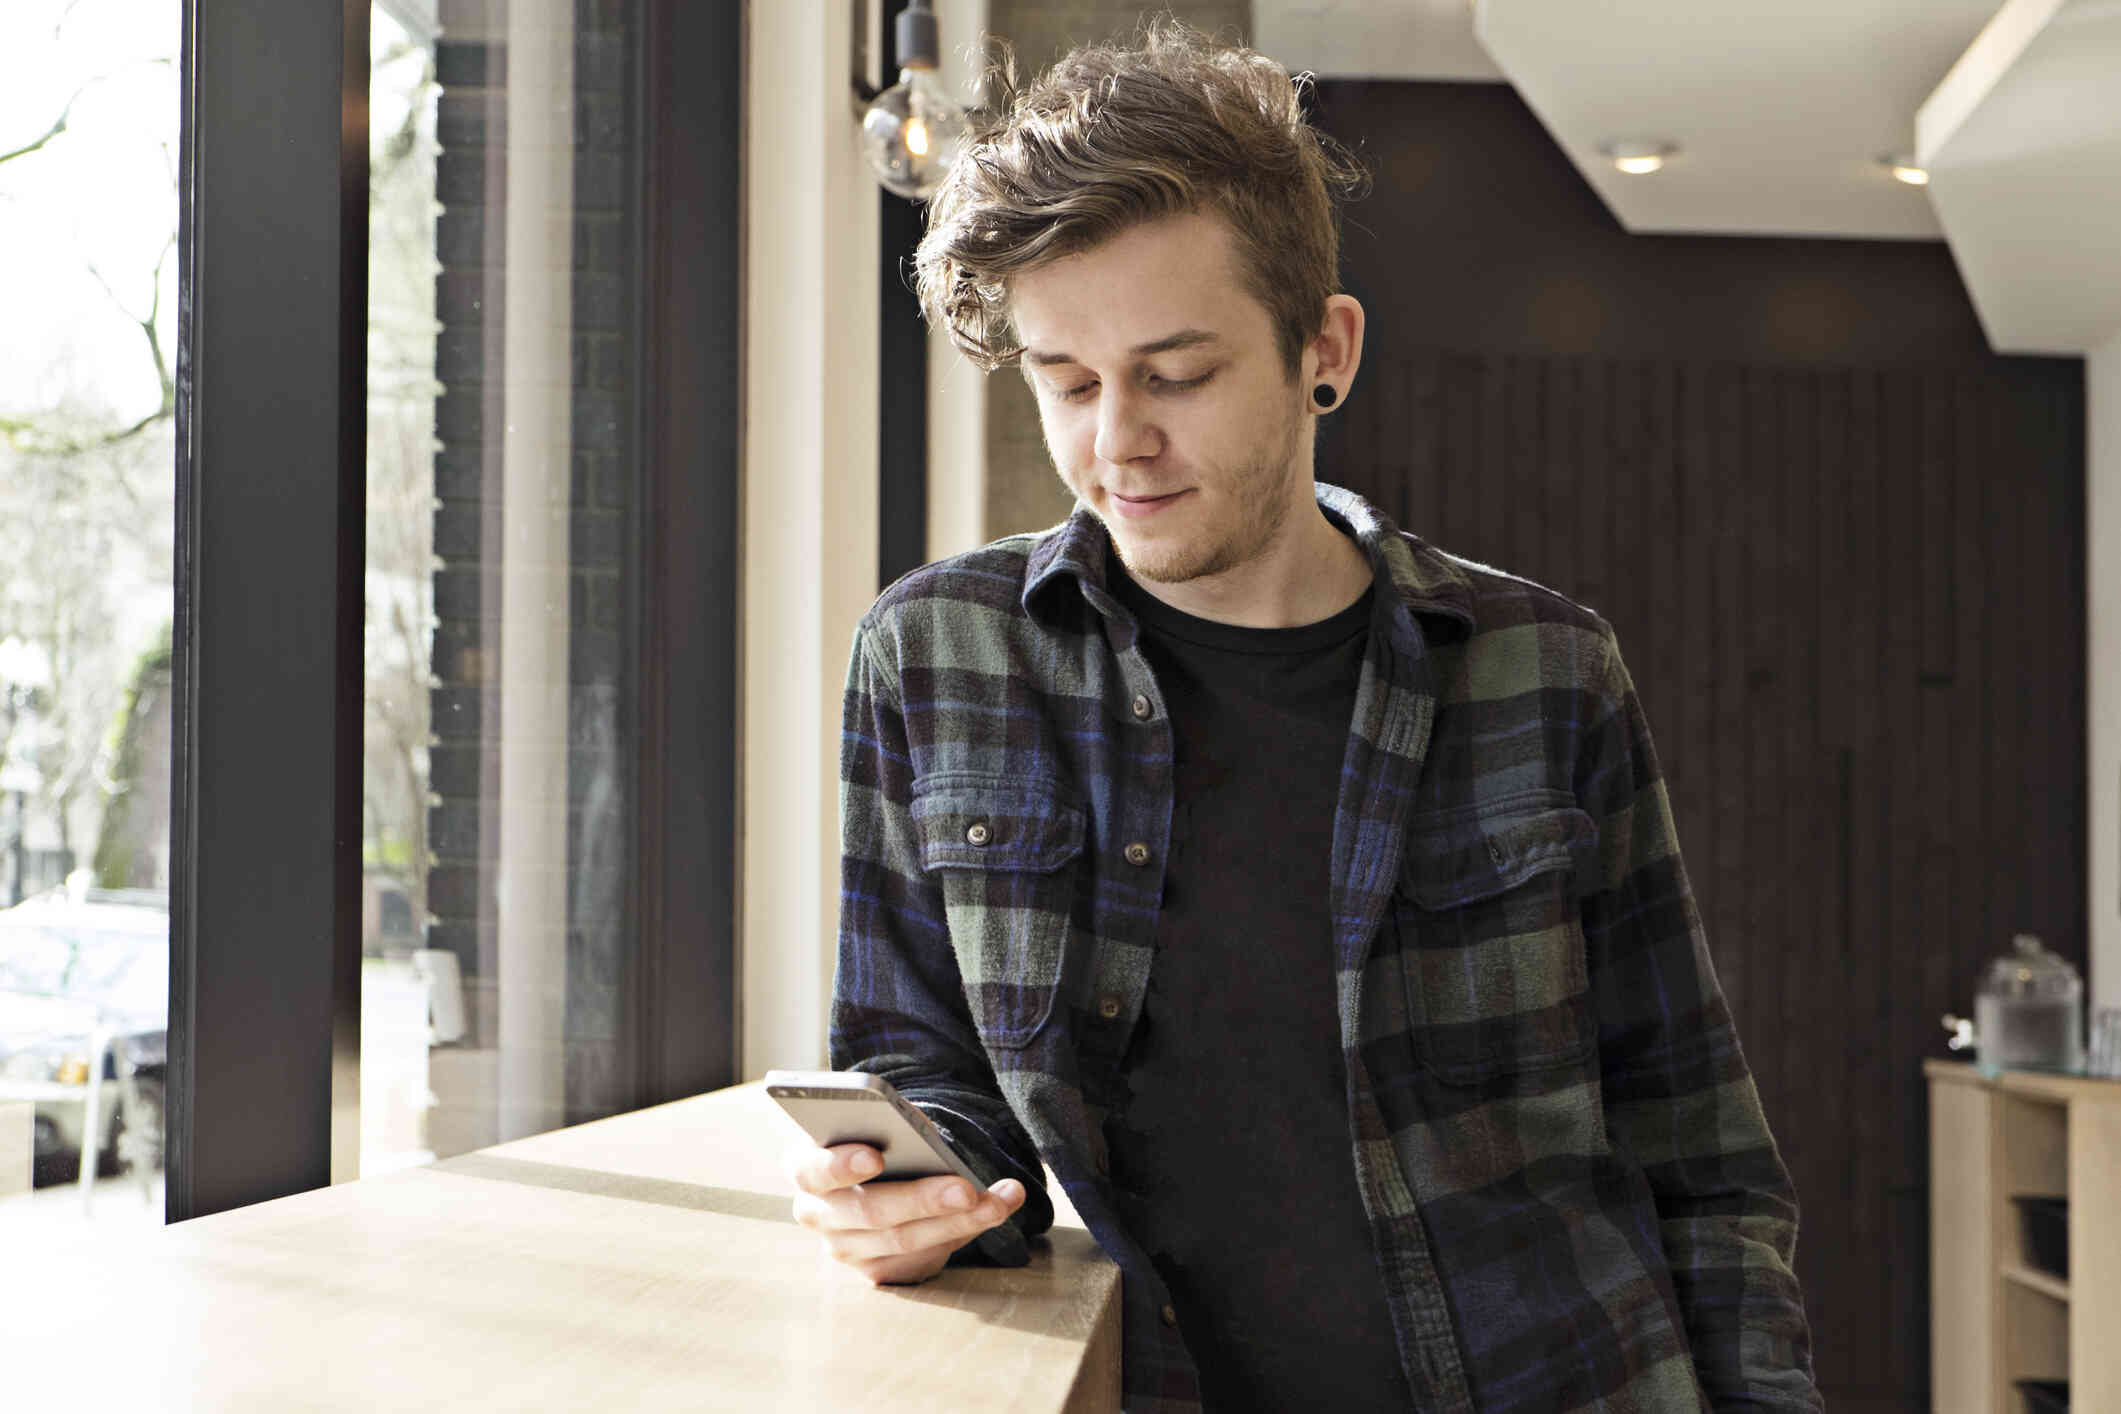 A man in a plaid shirt leans against a counter near a wndow and looks down at the cellphone in his hand.